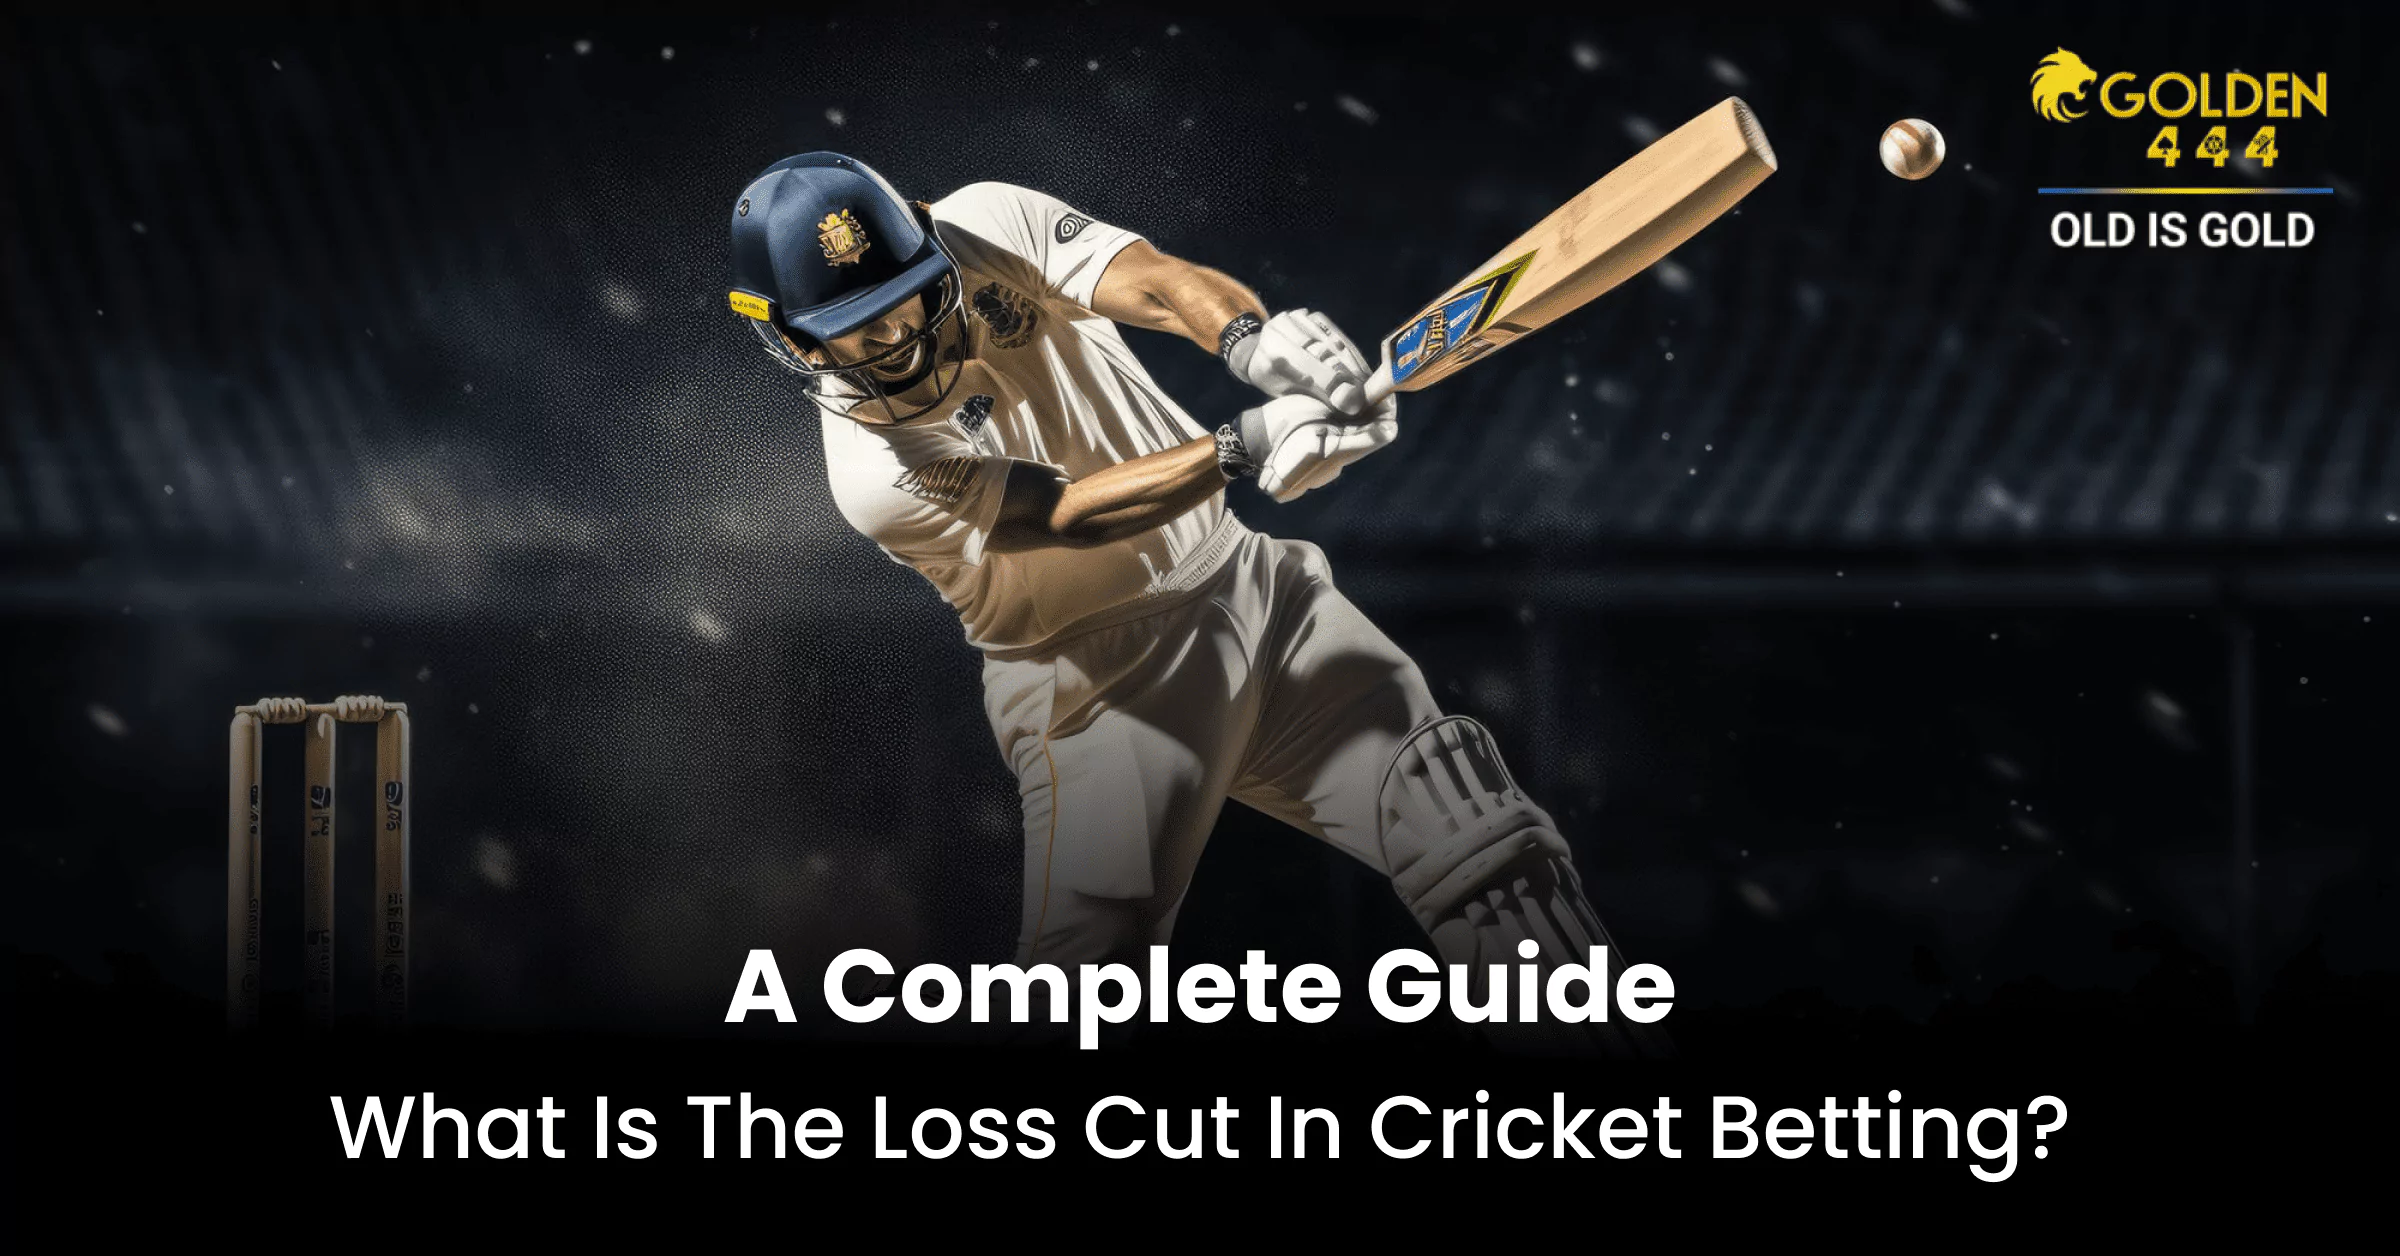 What is the loss cut in cricket betting? A Complete Guide